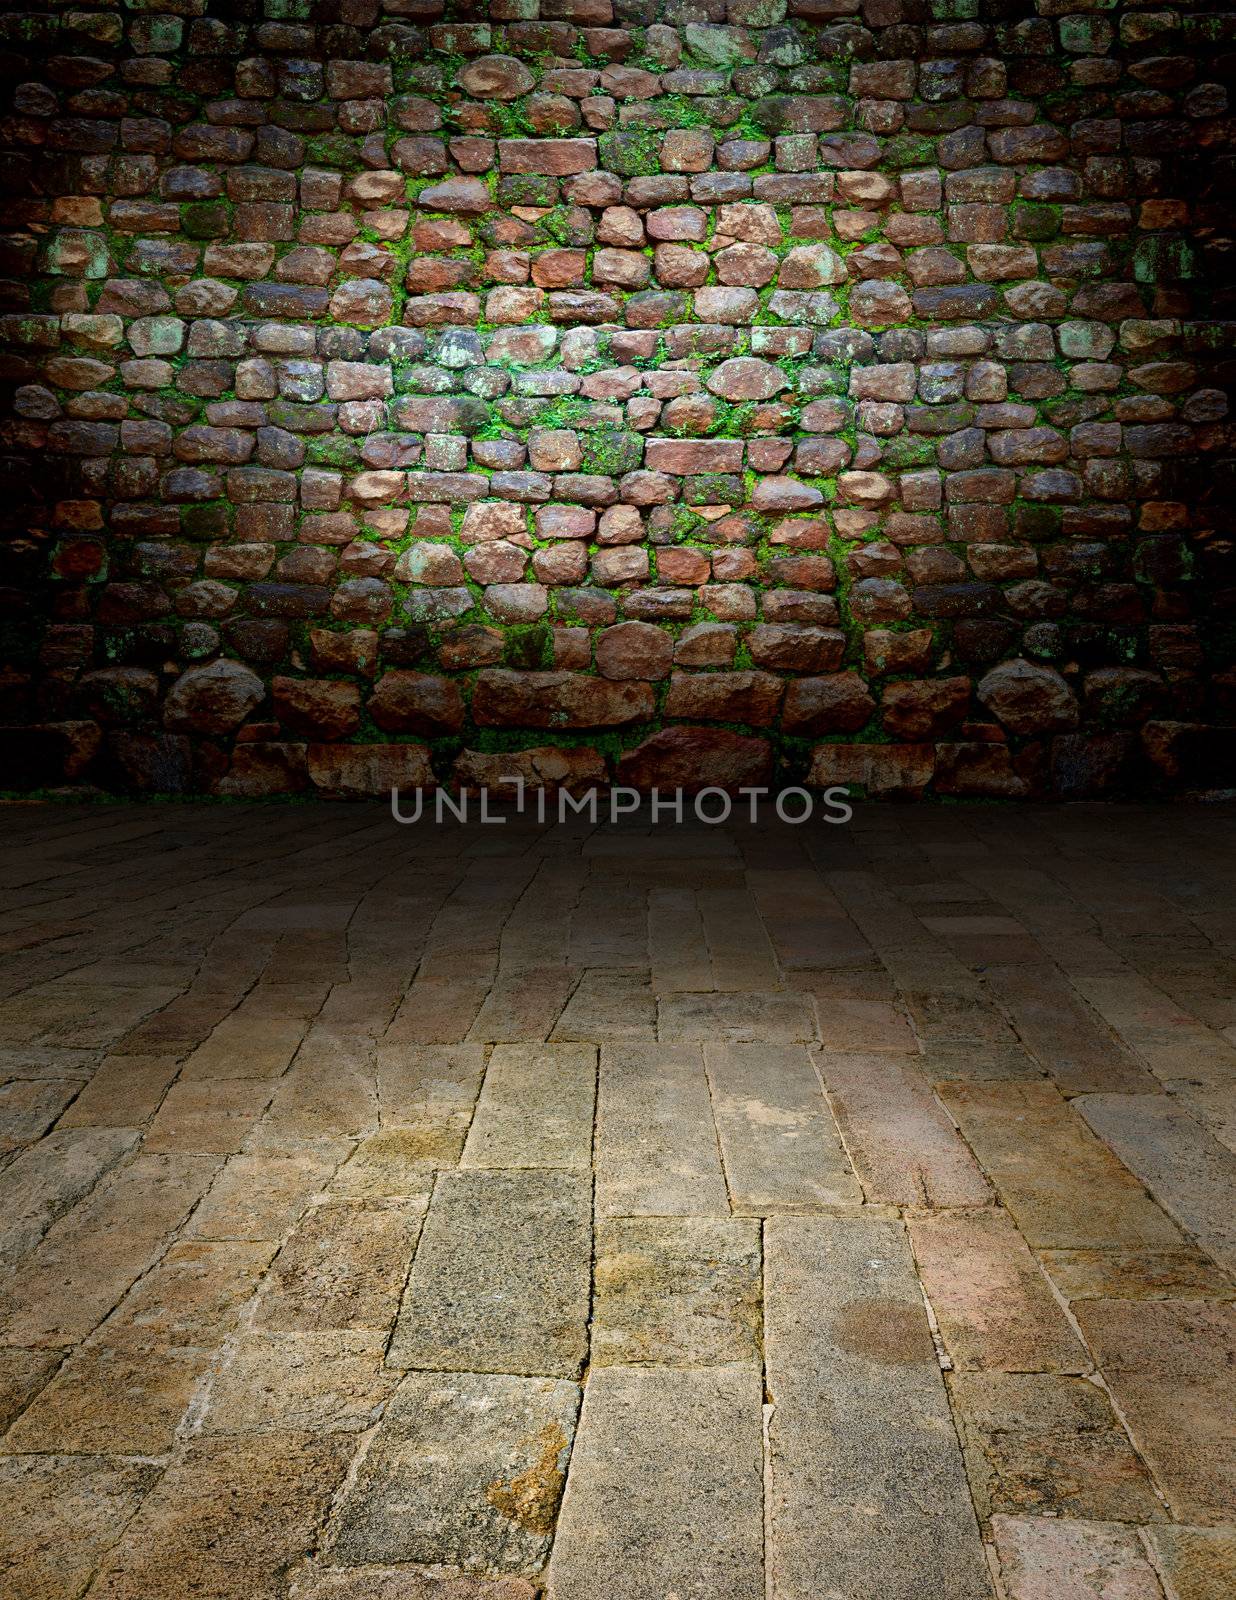 Artistic interiors - a scene with a stone floor